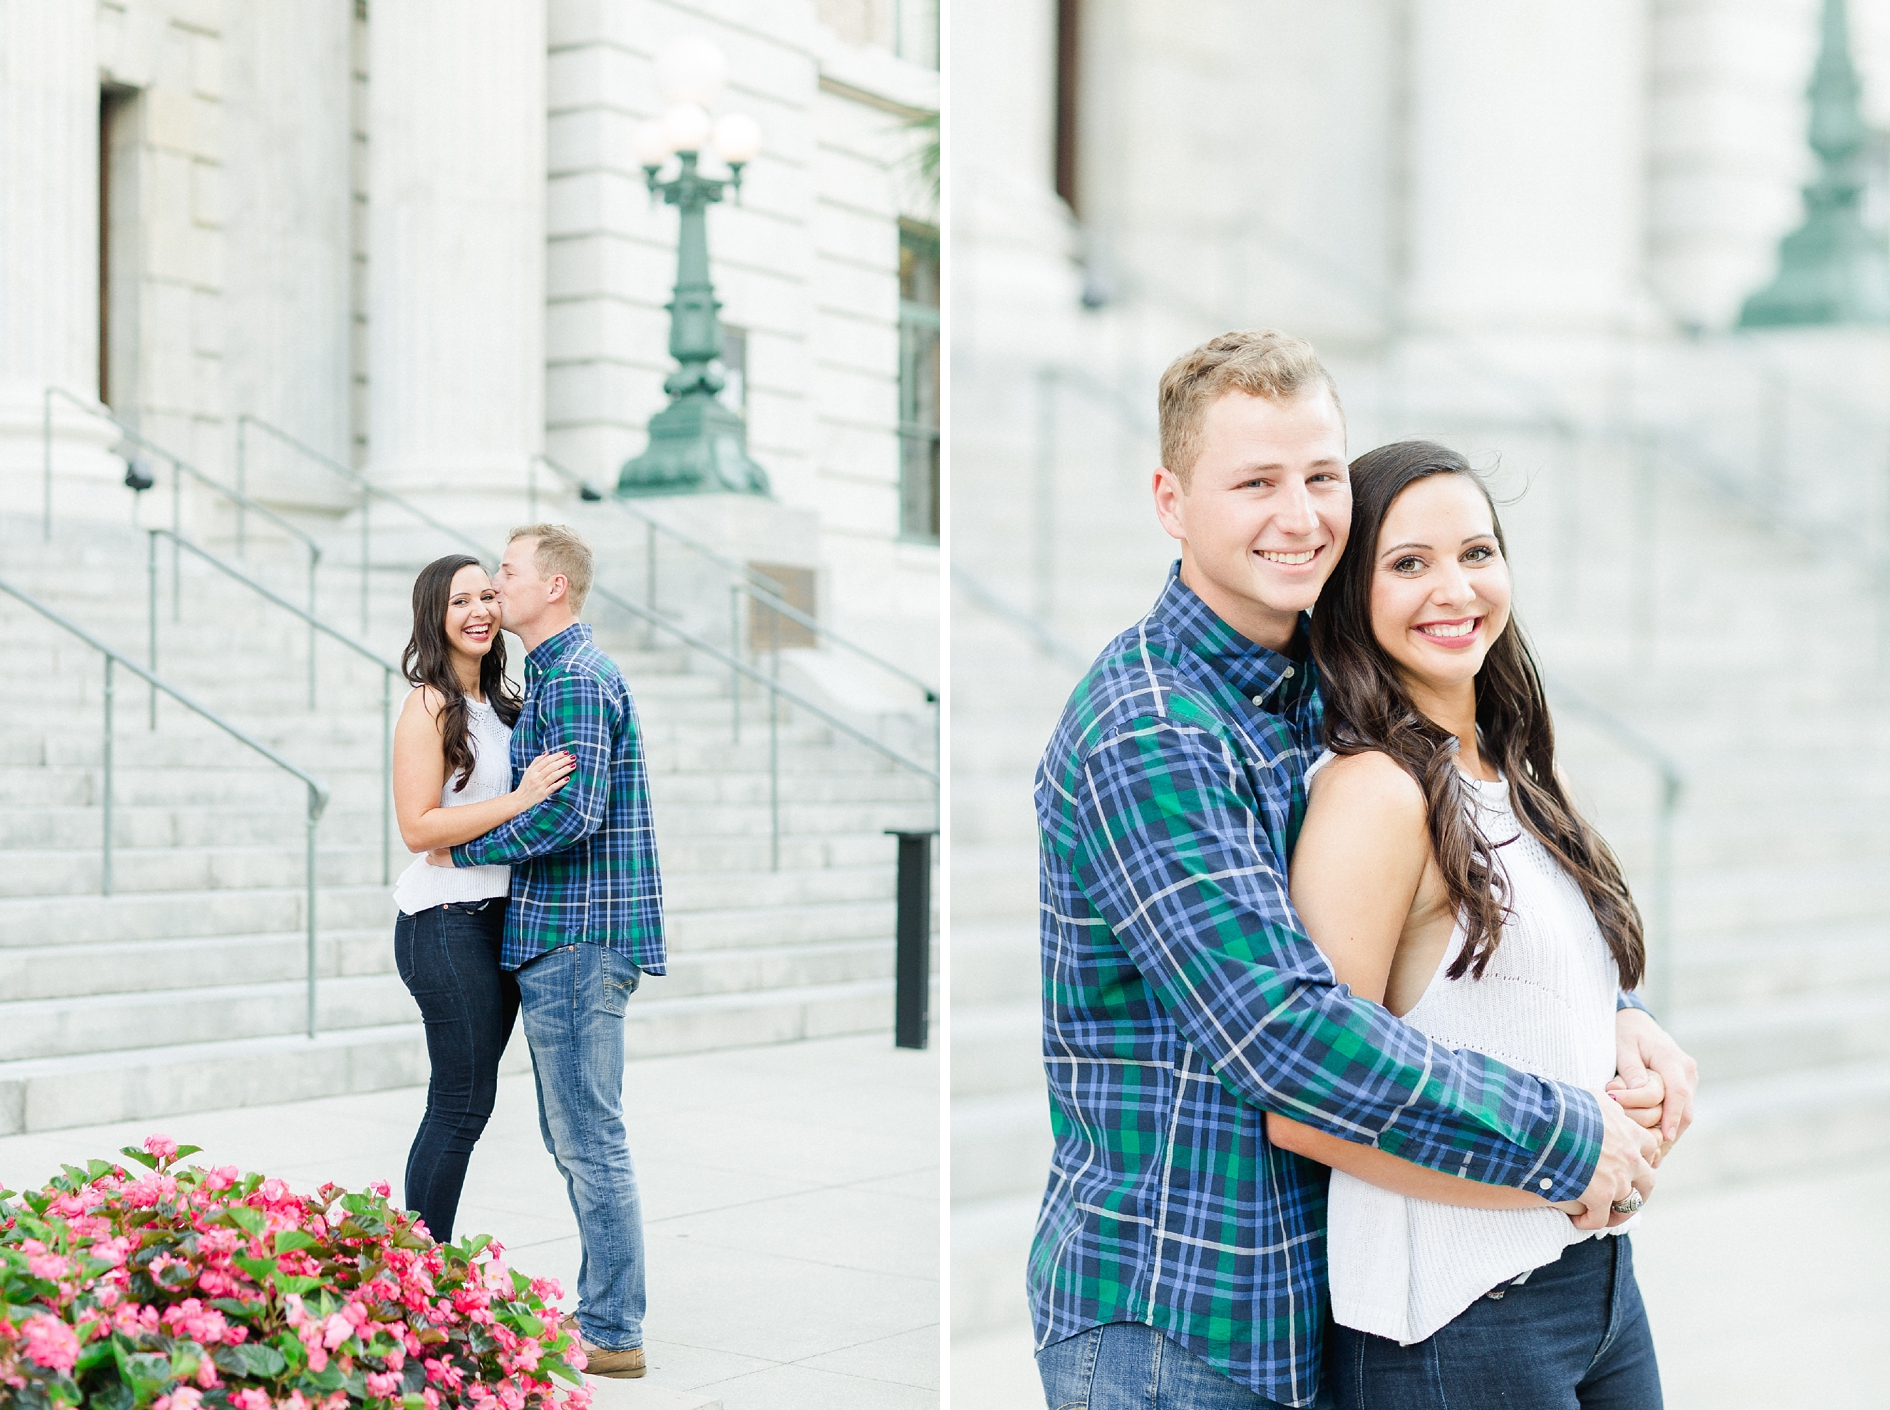 South Tampa Engagement | © Ailyn La Torre Photography 2017